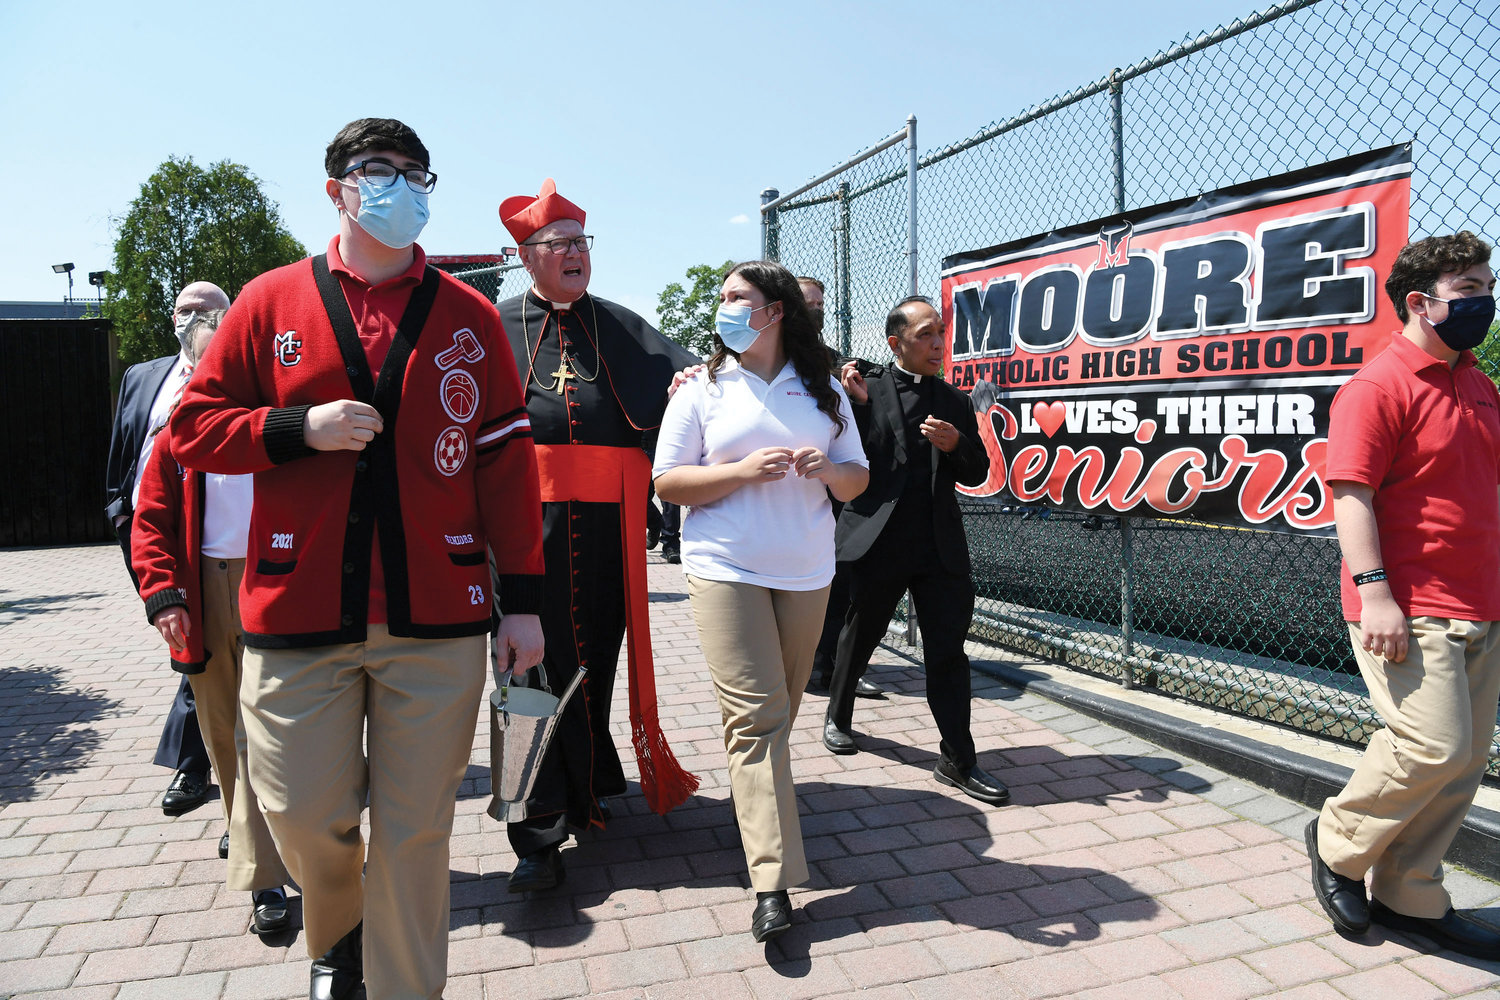 Cardinal Dolan walks with students following his dedication of the new athletic field at Moore Catholic High School on Staten Island May 17. From front left are John Ardi, Magdalena Bielawski and Luke Curcio. Michael Deegan, superintendent of schools for the archdiocese, is at back left and Father Rhey Garcia, the school chaplain, is back right. The cardinal also blessed the school’s newly refurbished chapel and the repurposed former library which is now the state-of-the-art Student Collaboration Center.